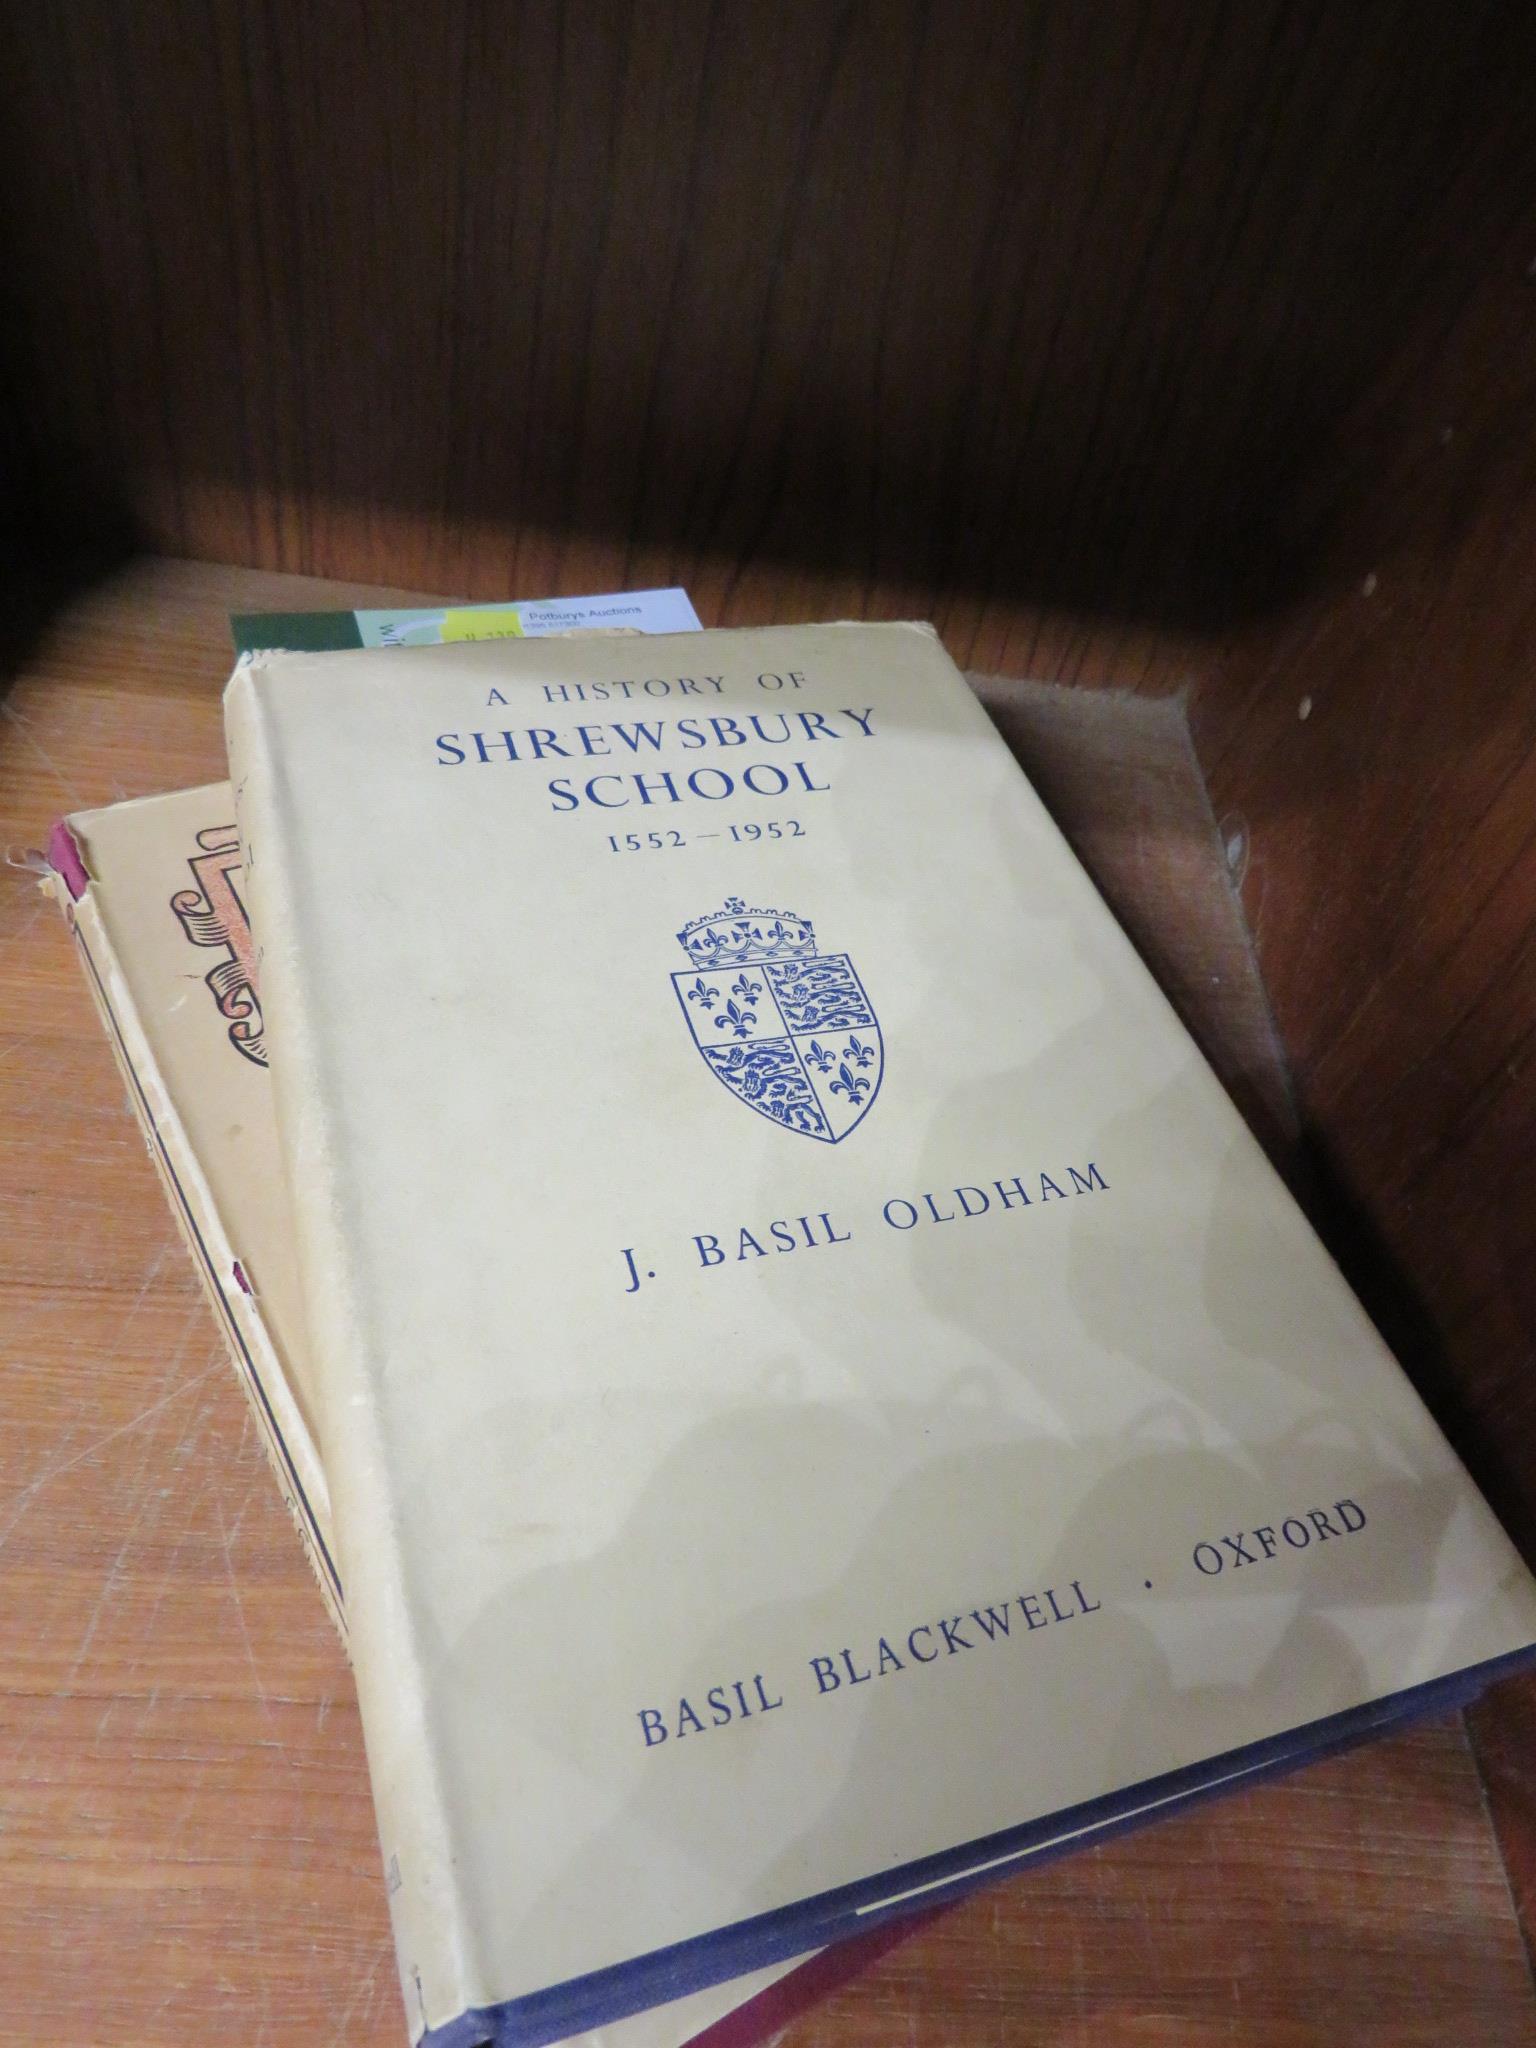 Two books - A History of Shrewsbury School, and The Story of St Catherine's School Cambridge